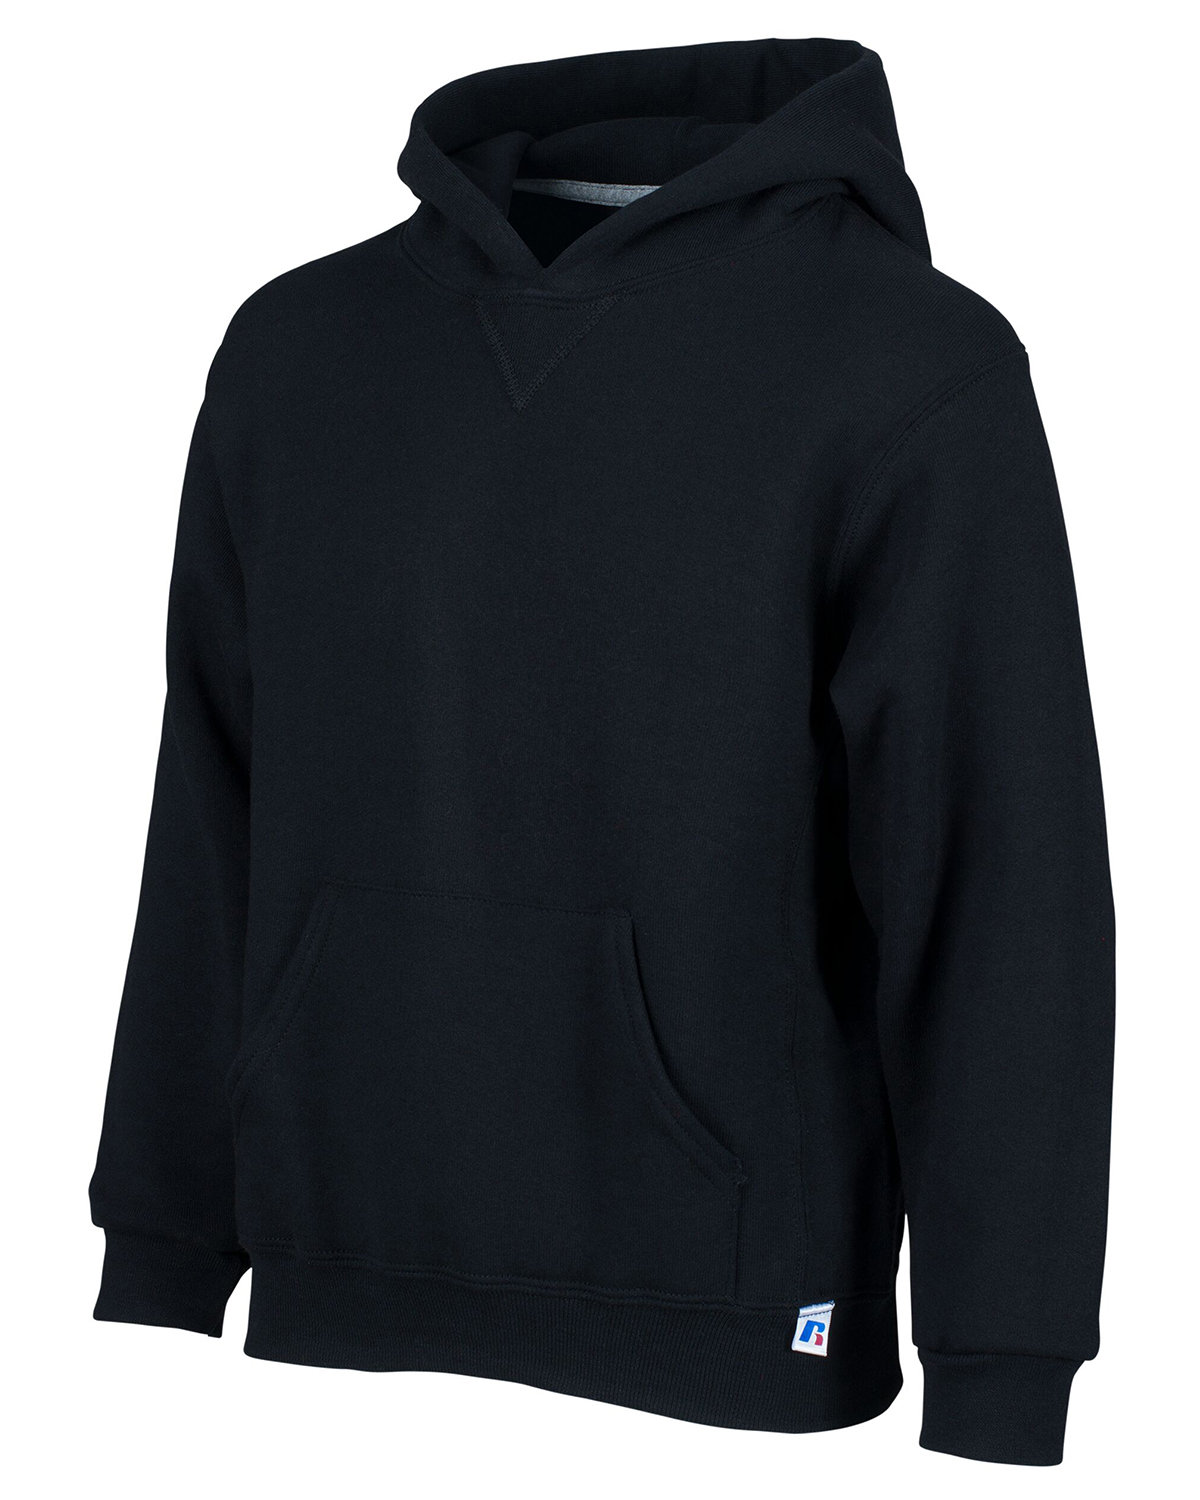 Russell Athletic Youth Dri-Power® Pullover Sweatshirt | alphabroder